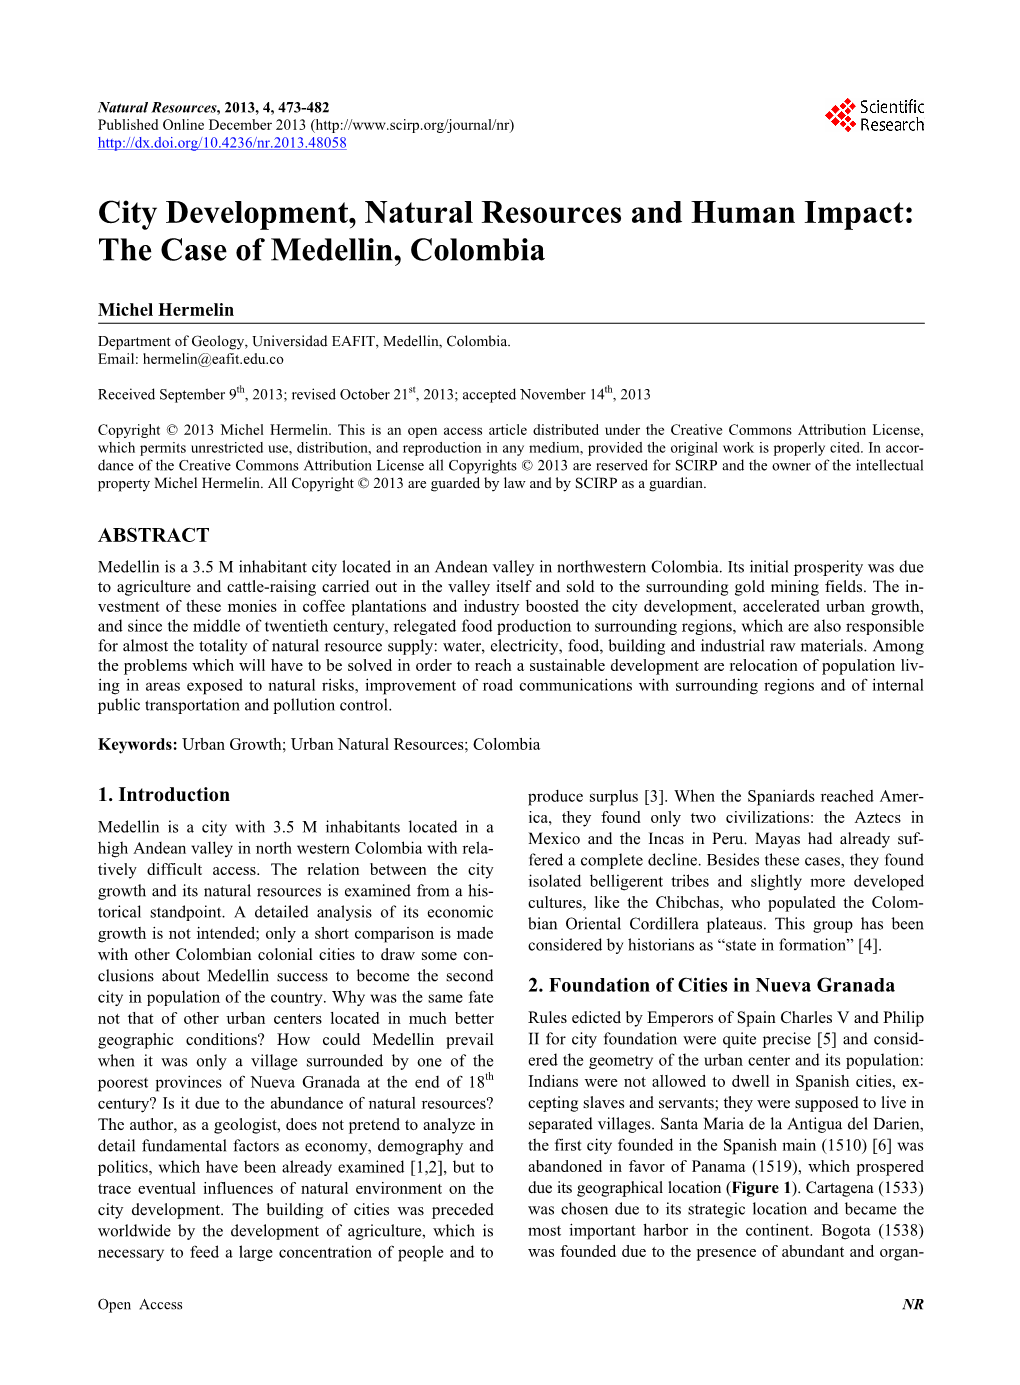 City Development, Natural Resources and Human Impact: the Case of Medellin, Colombia